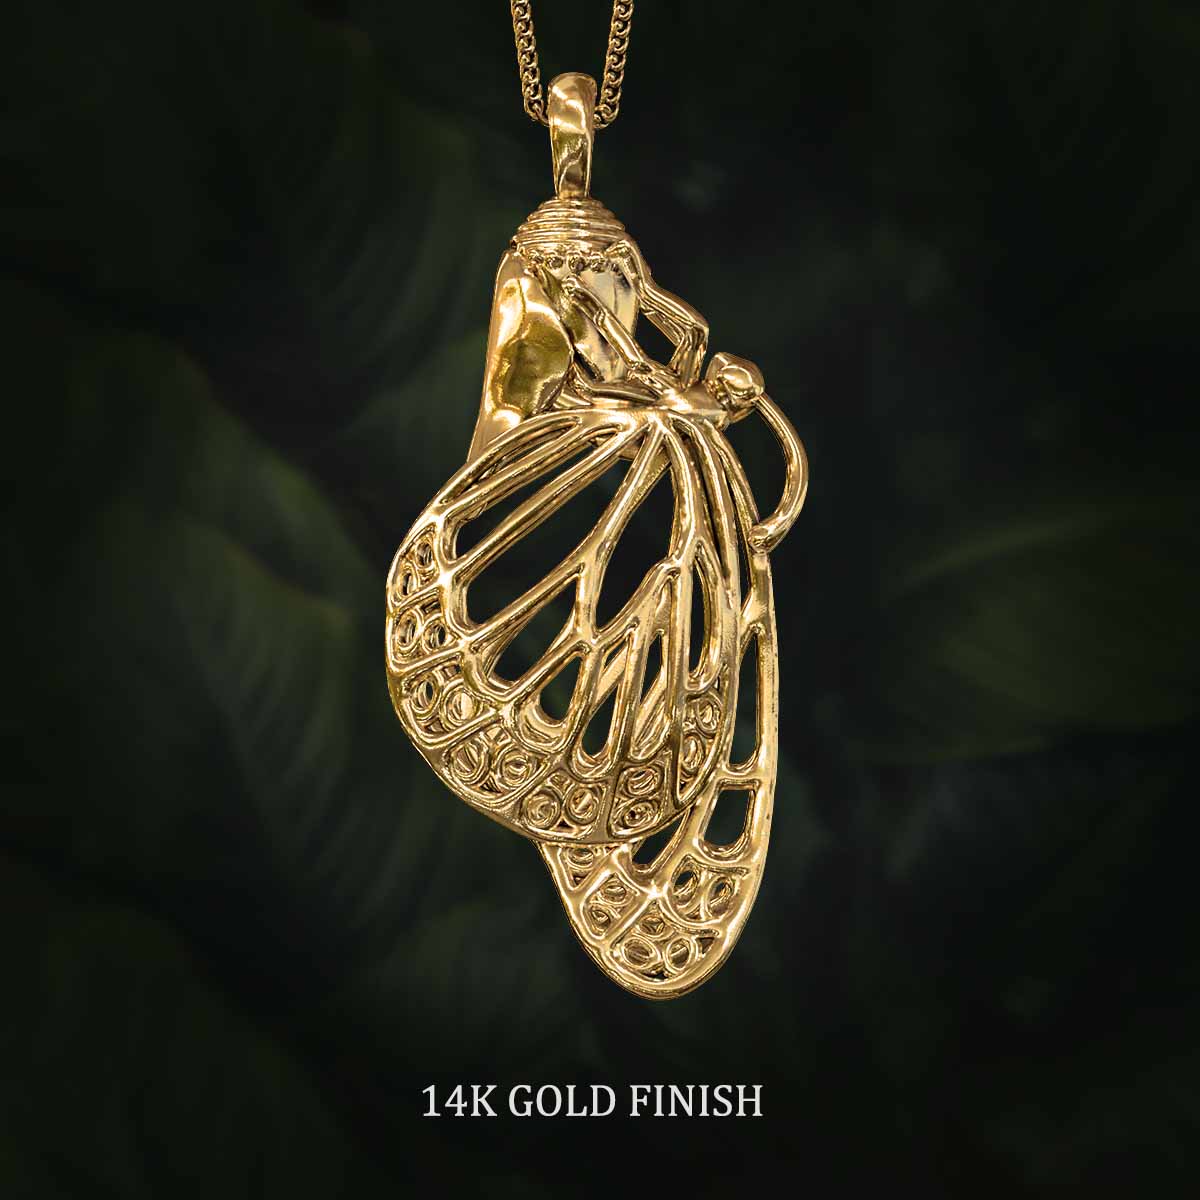     14k-Gold-Finish-Monarch-Chrysalis-Pendant-Jewelry-For-Necklace